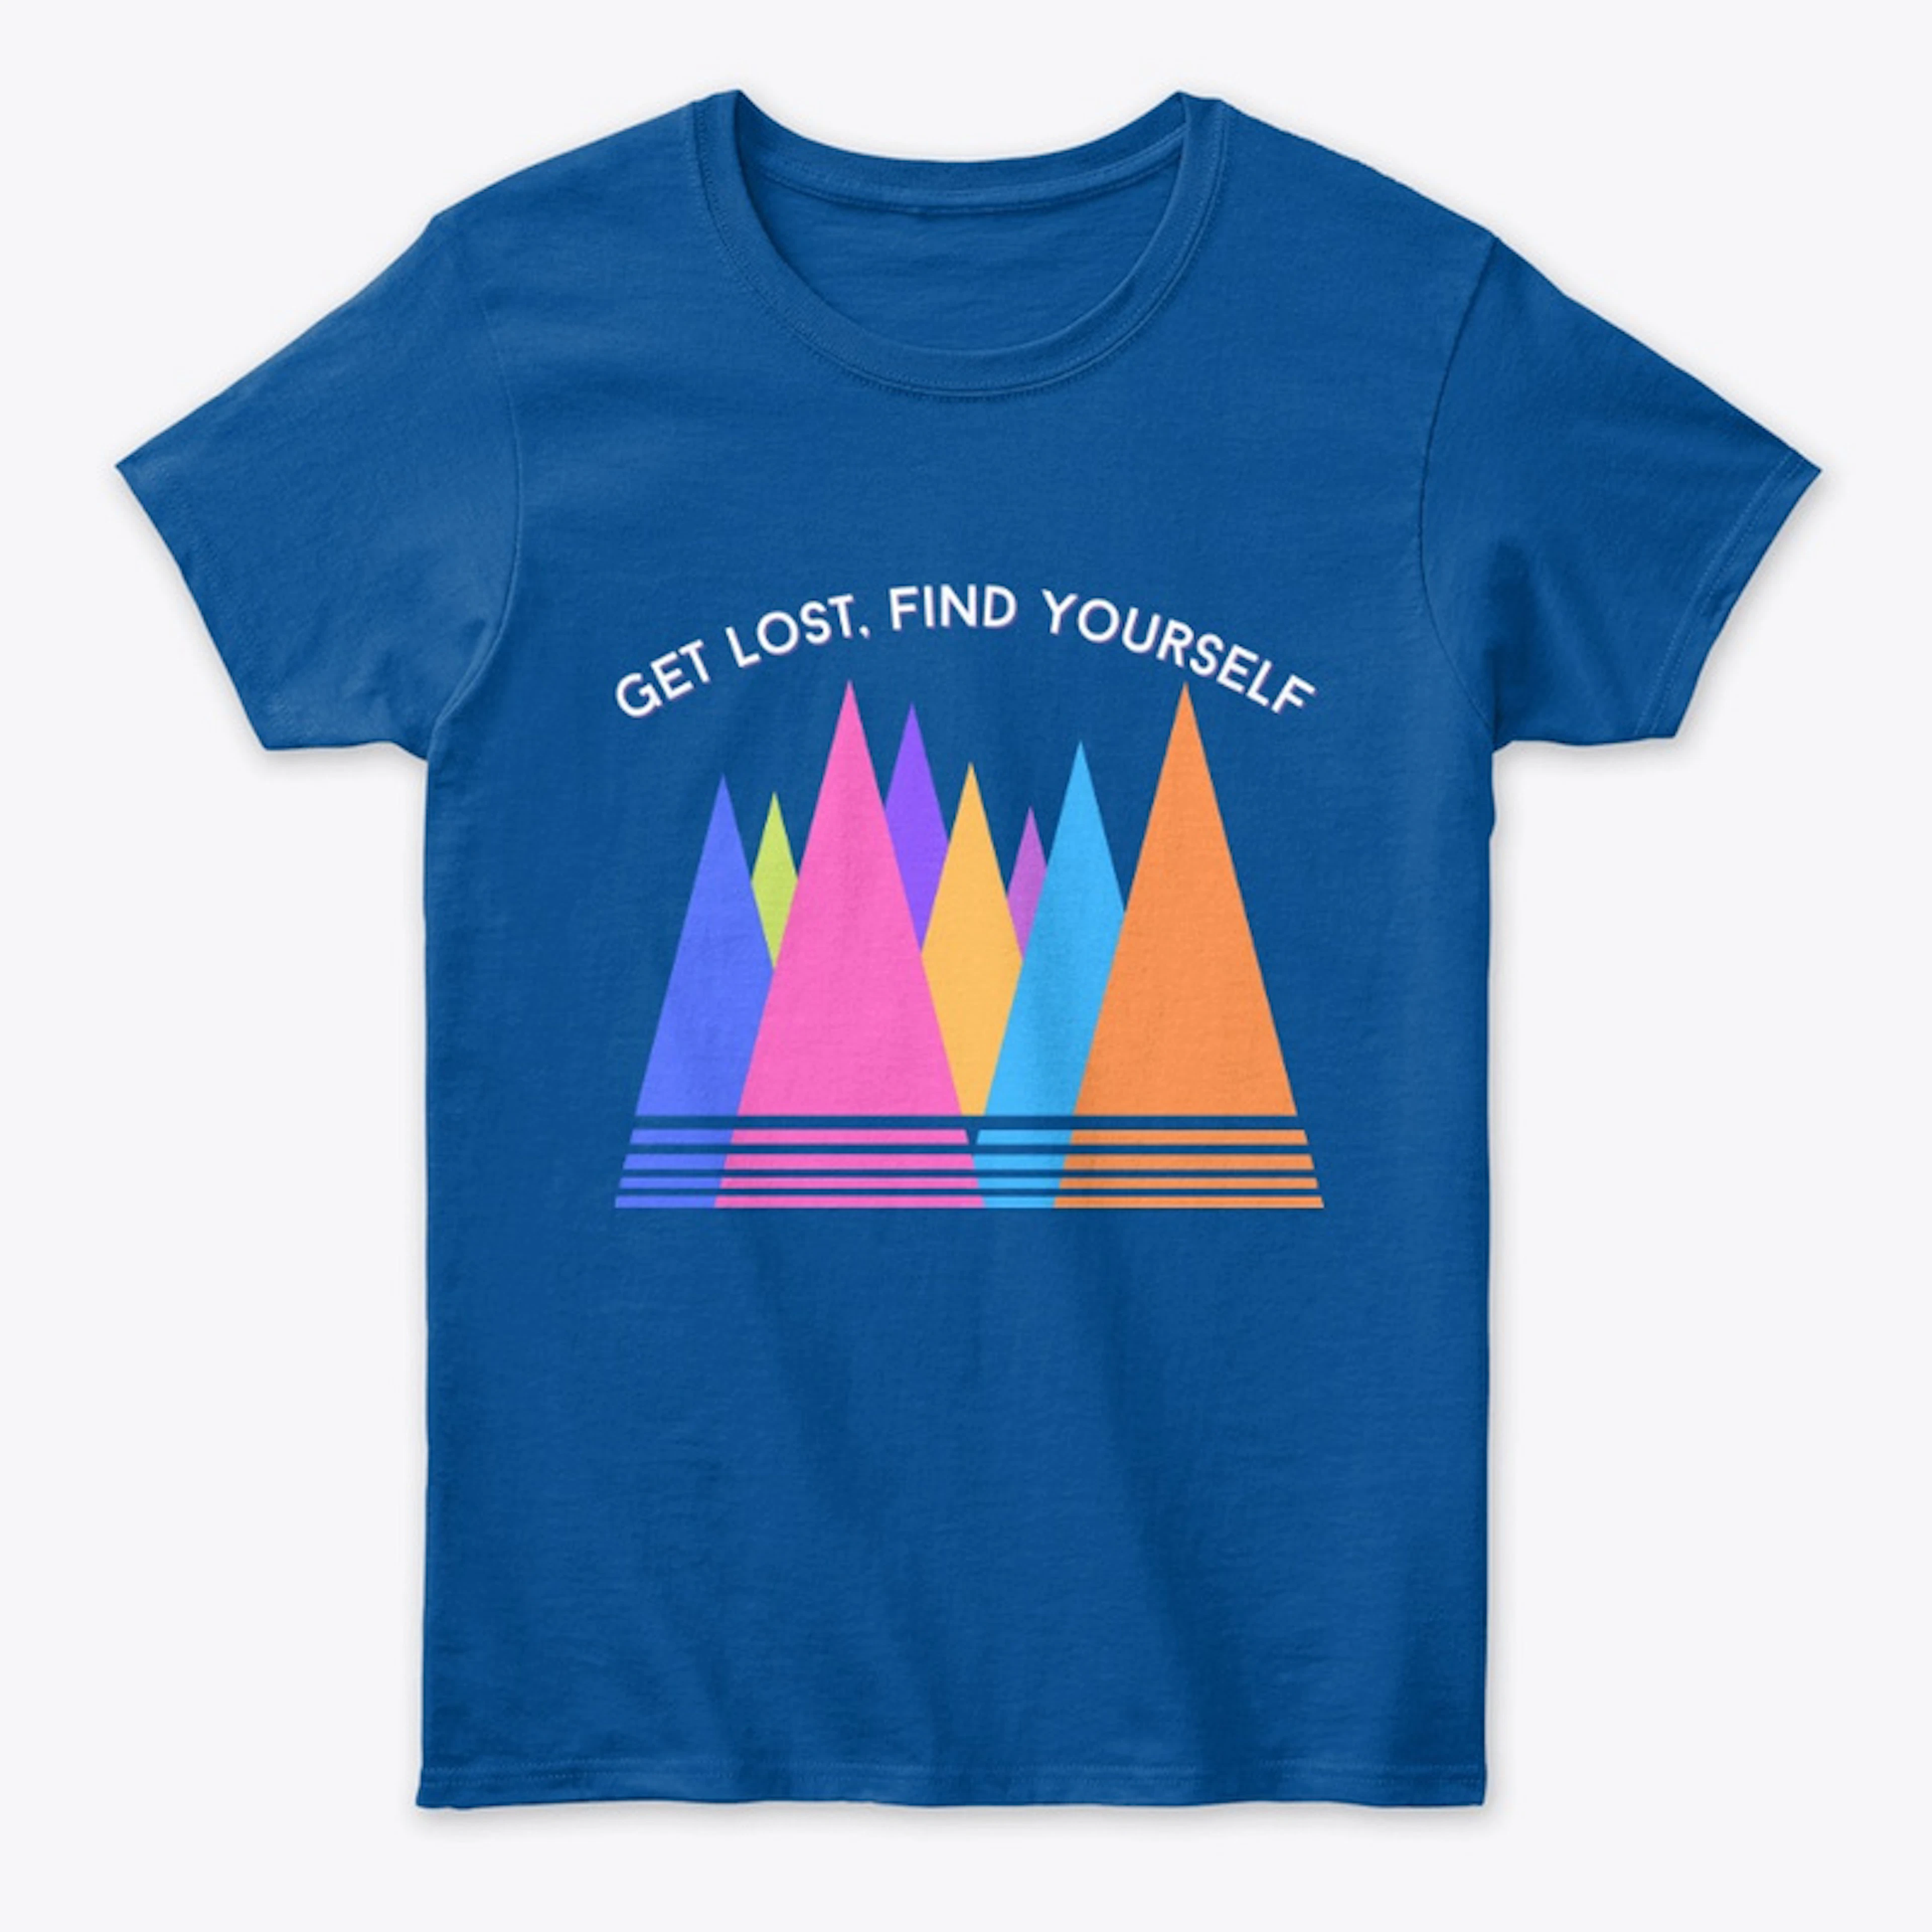 Get Lost, Find Yourself T-shirt